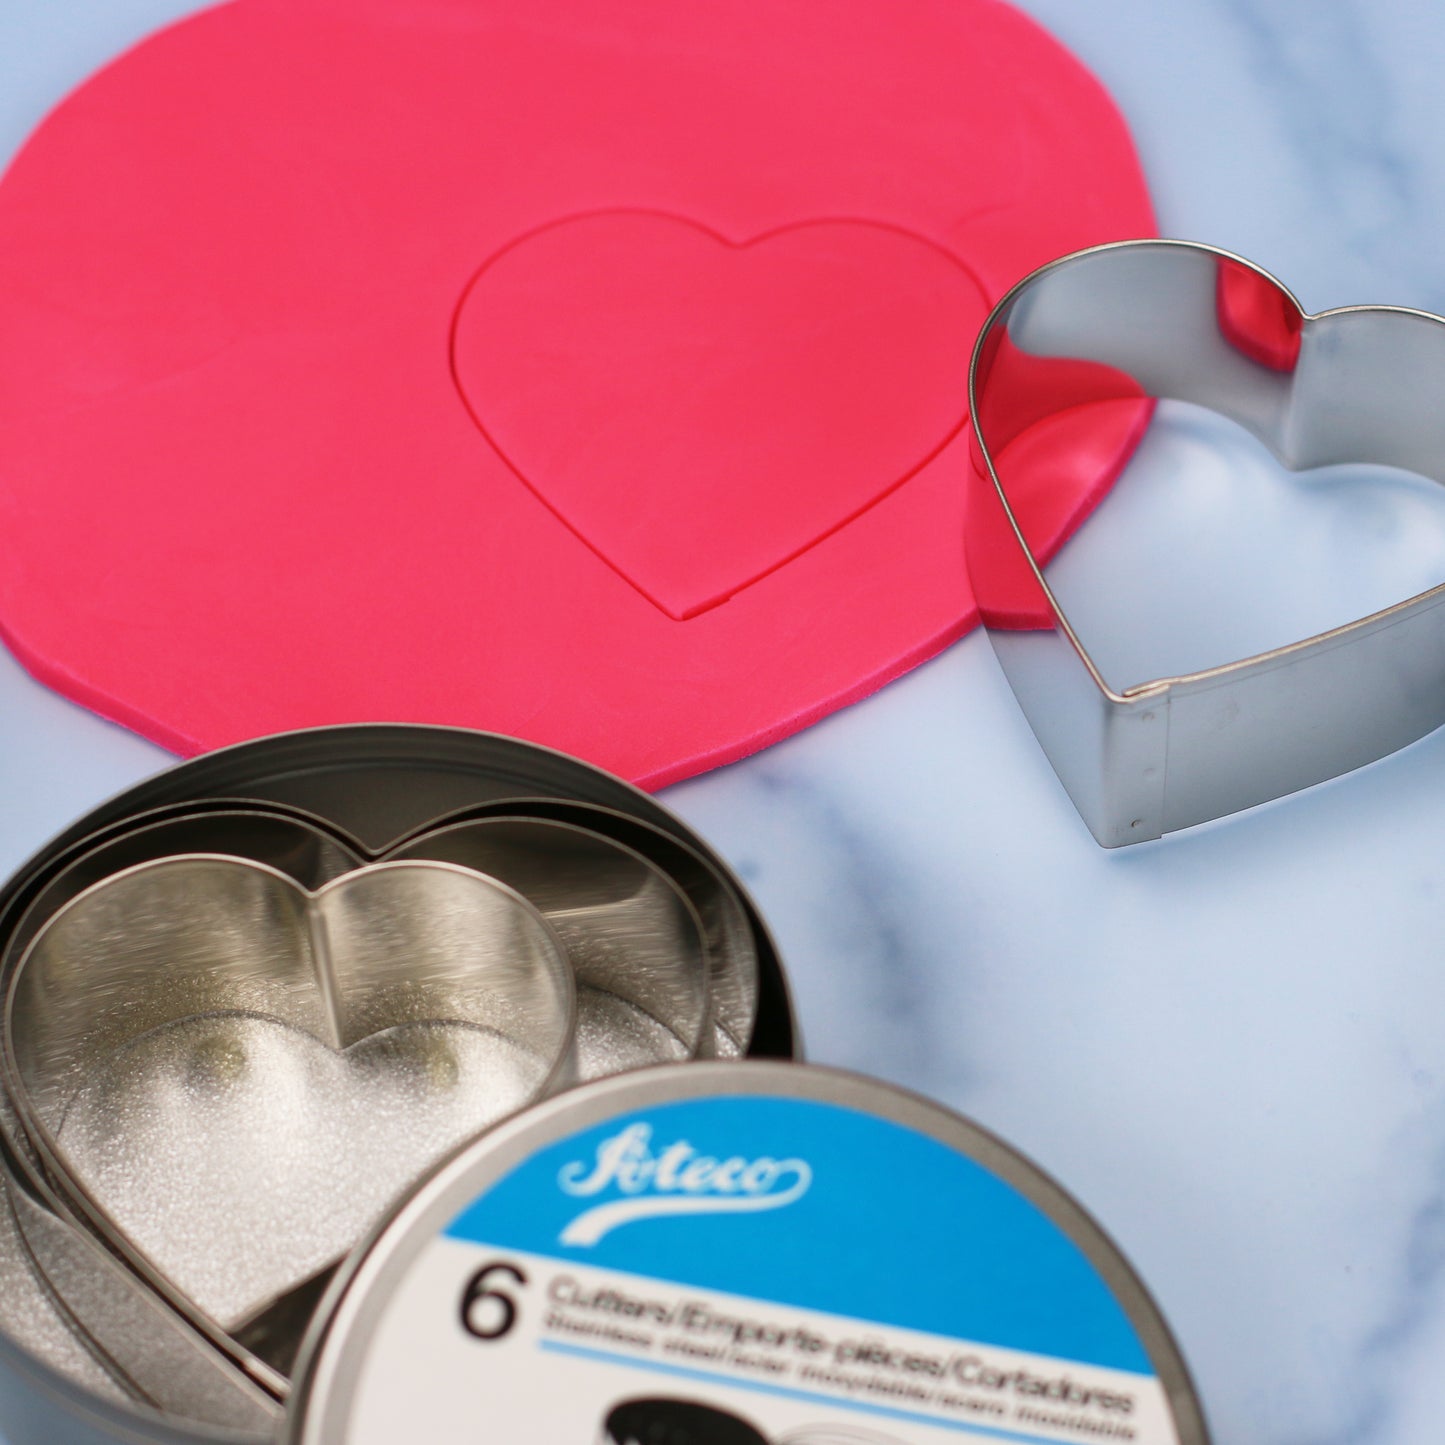 Ateco Stainless Steel Heart Cutter Set